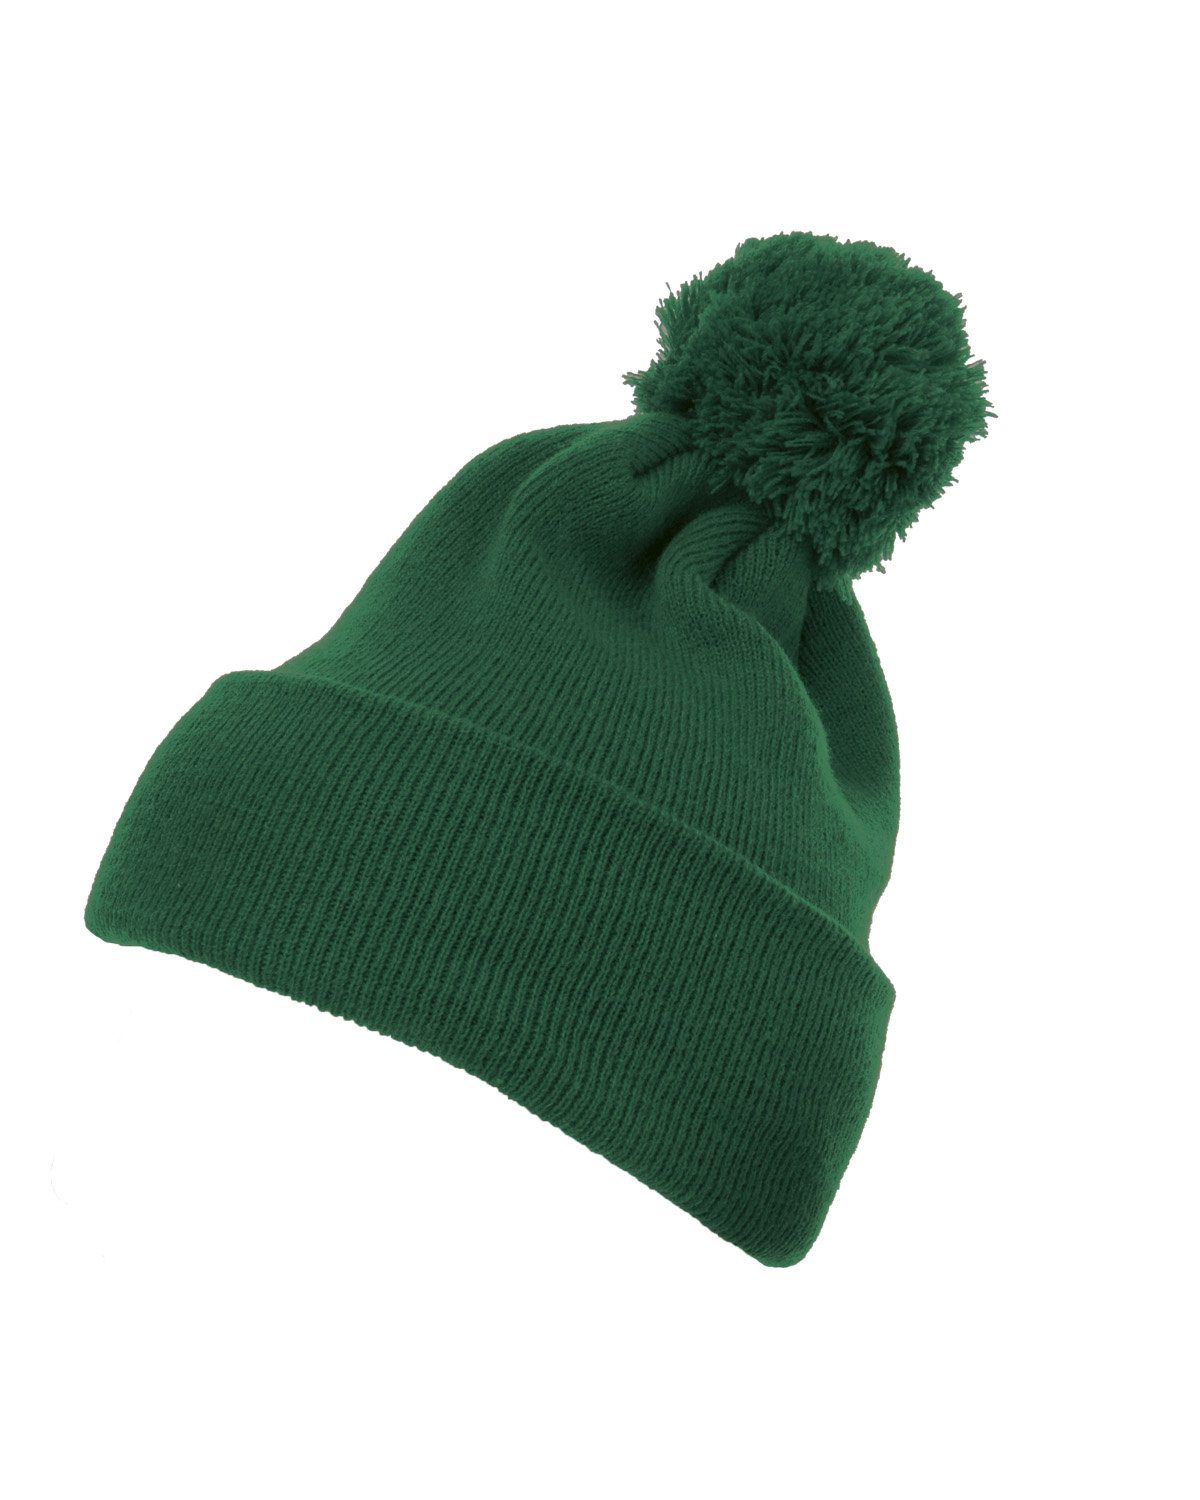 Yupoong Cuffed Knit Beanie with Pom Pom Hat | alphabroder | Beanies